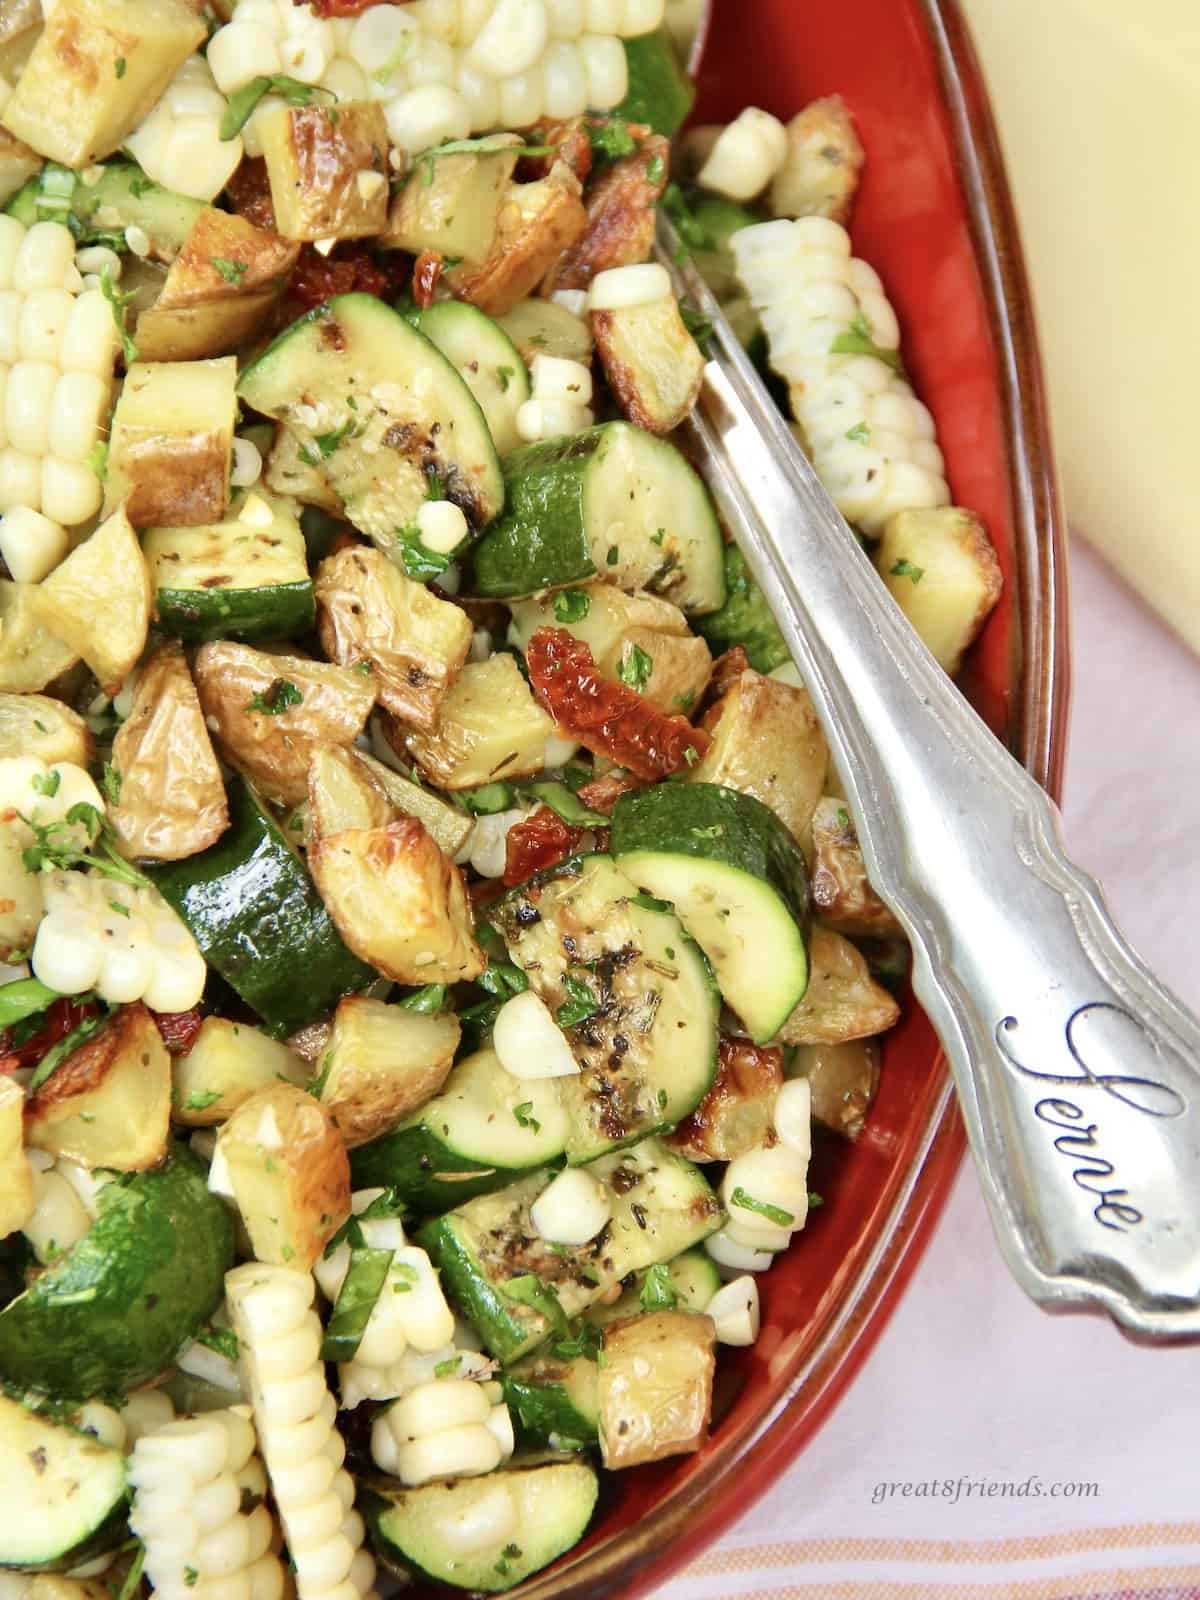 Upclose view of the potato salad with grilled veggies .